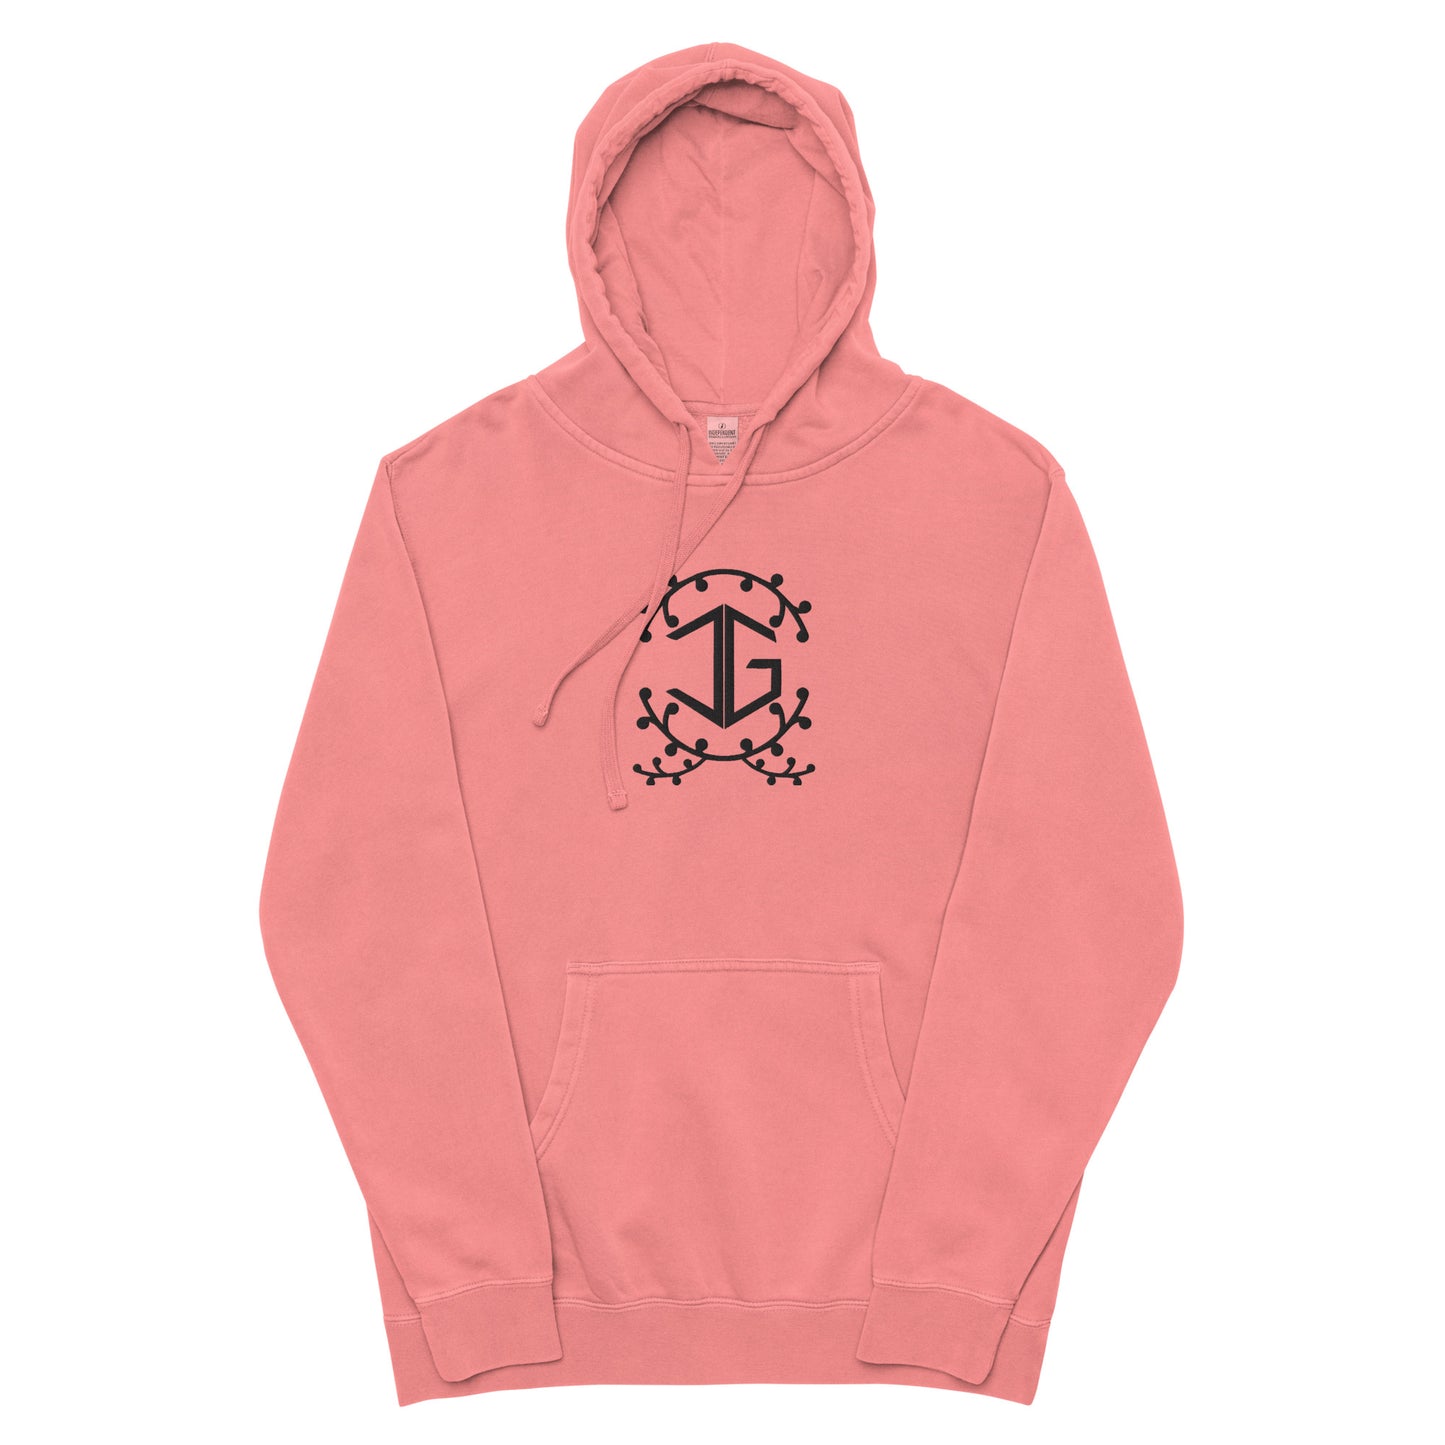 Common Ground Oversized Pigment Dyed Hoodie